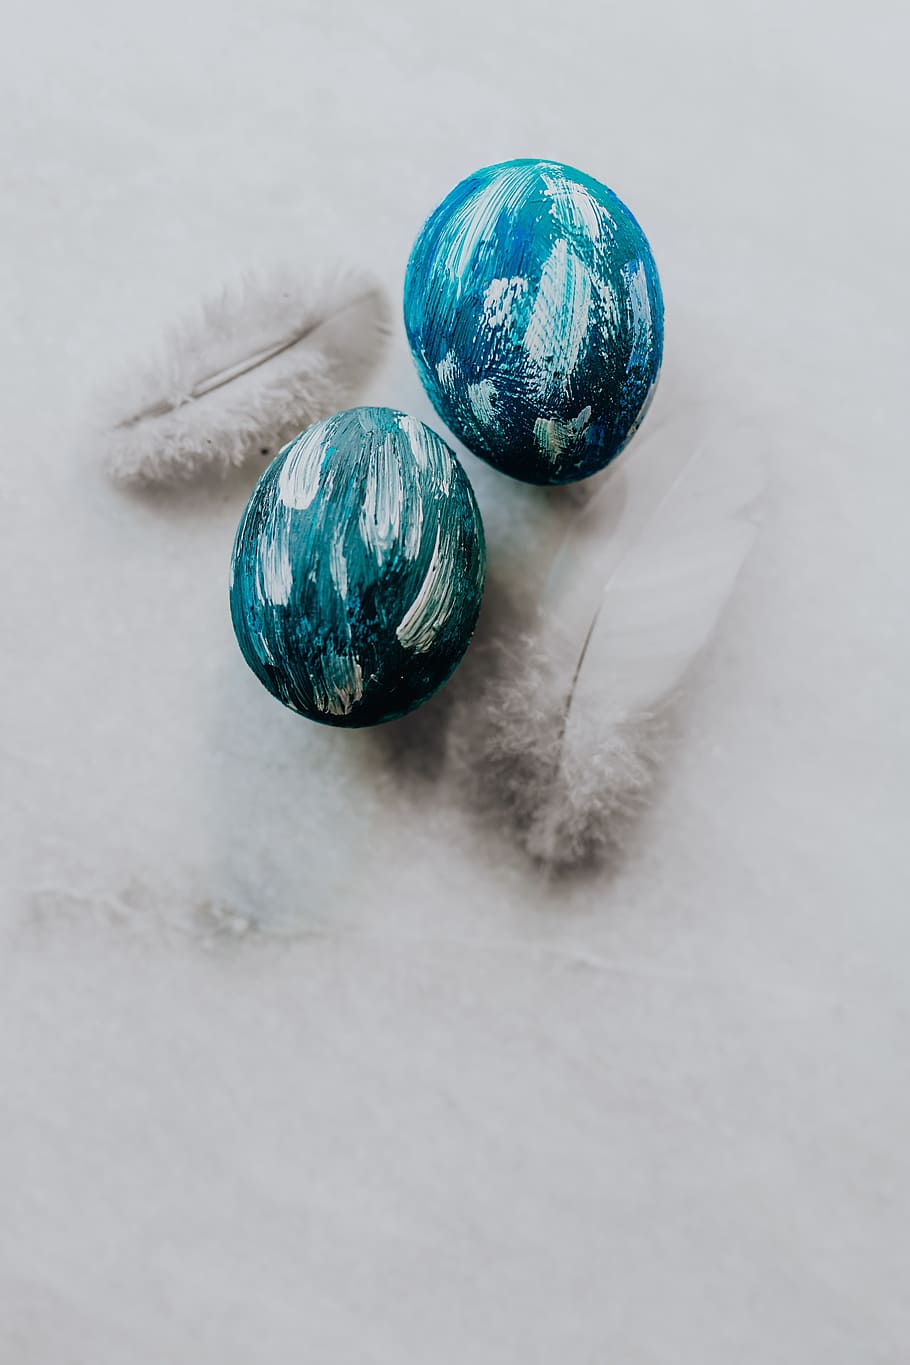 blue easter eggs, blue, eggs, colorful, easter, painted, sphere, still life, indoors, holiday